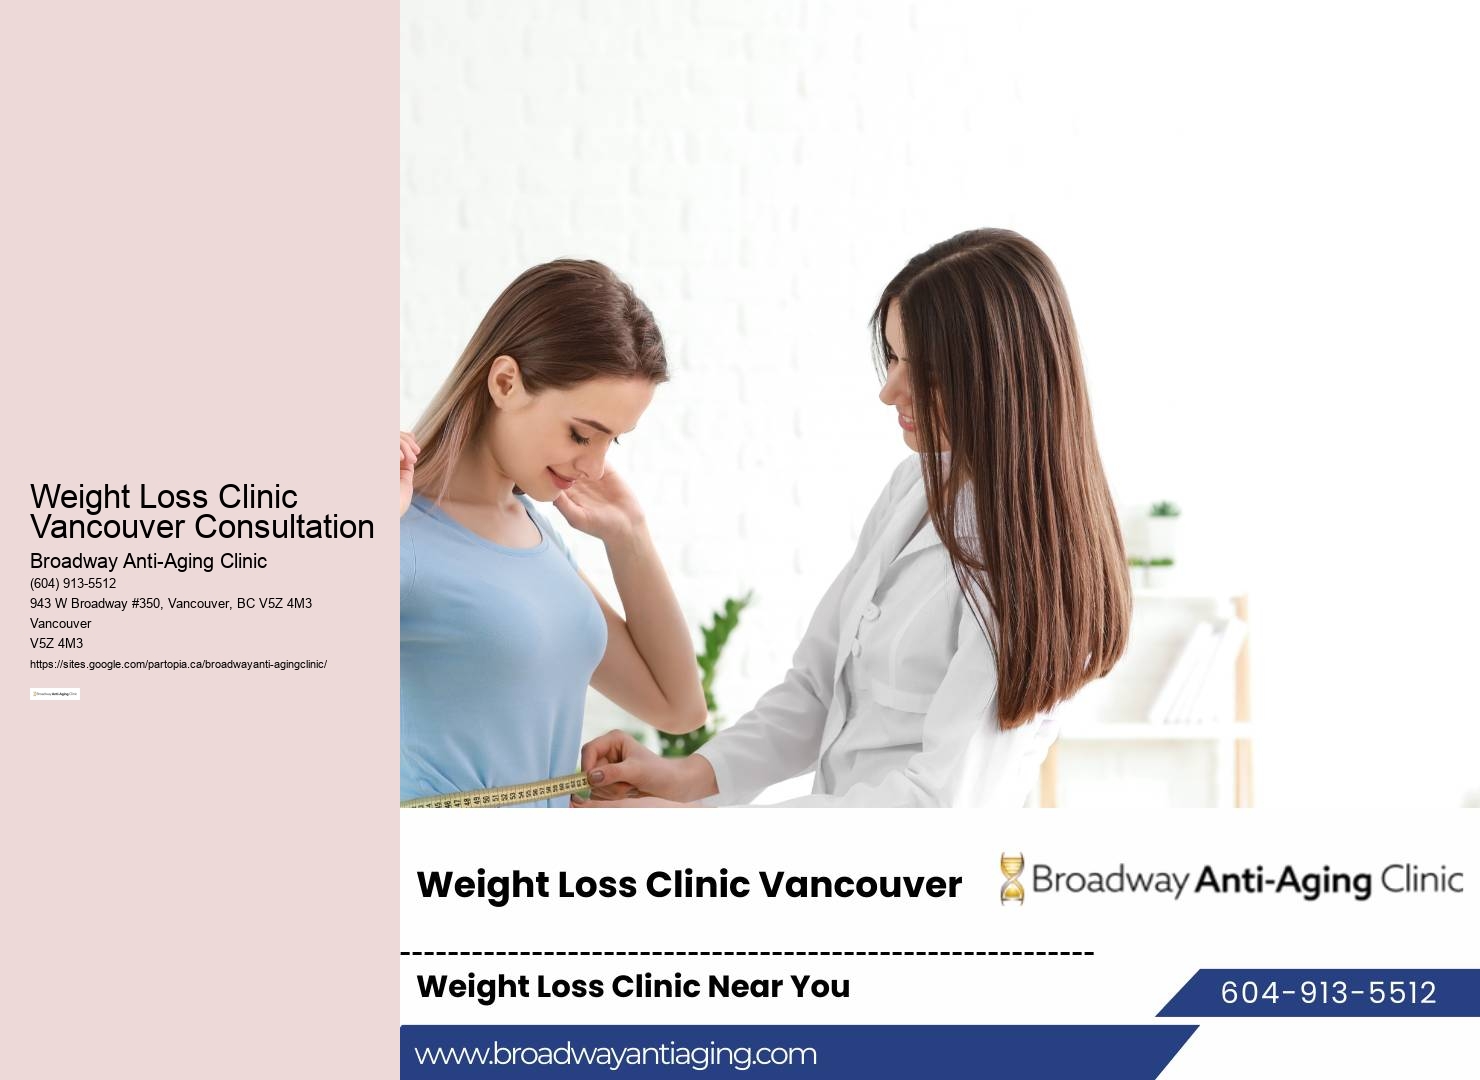 Weight Loss Clinic Vancouver Consultation